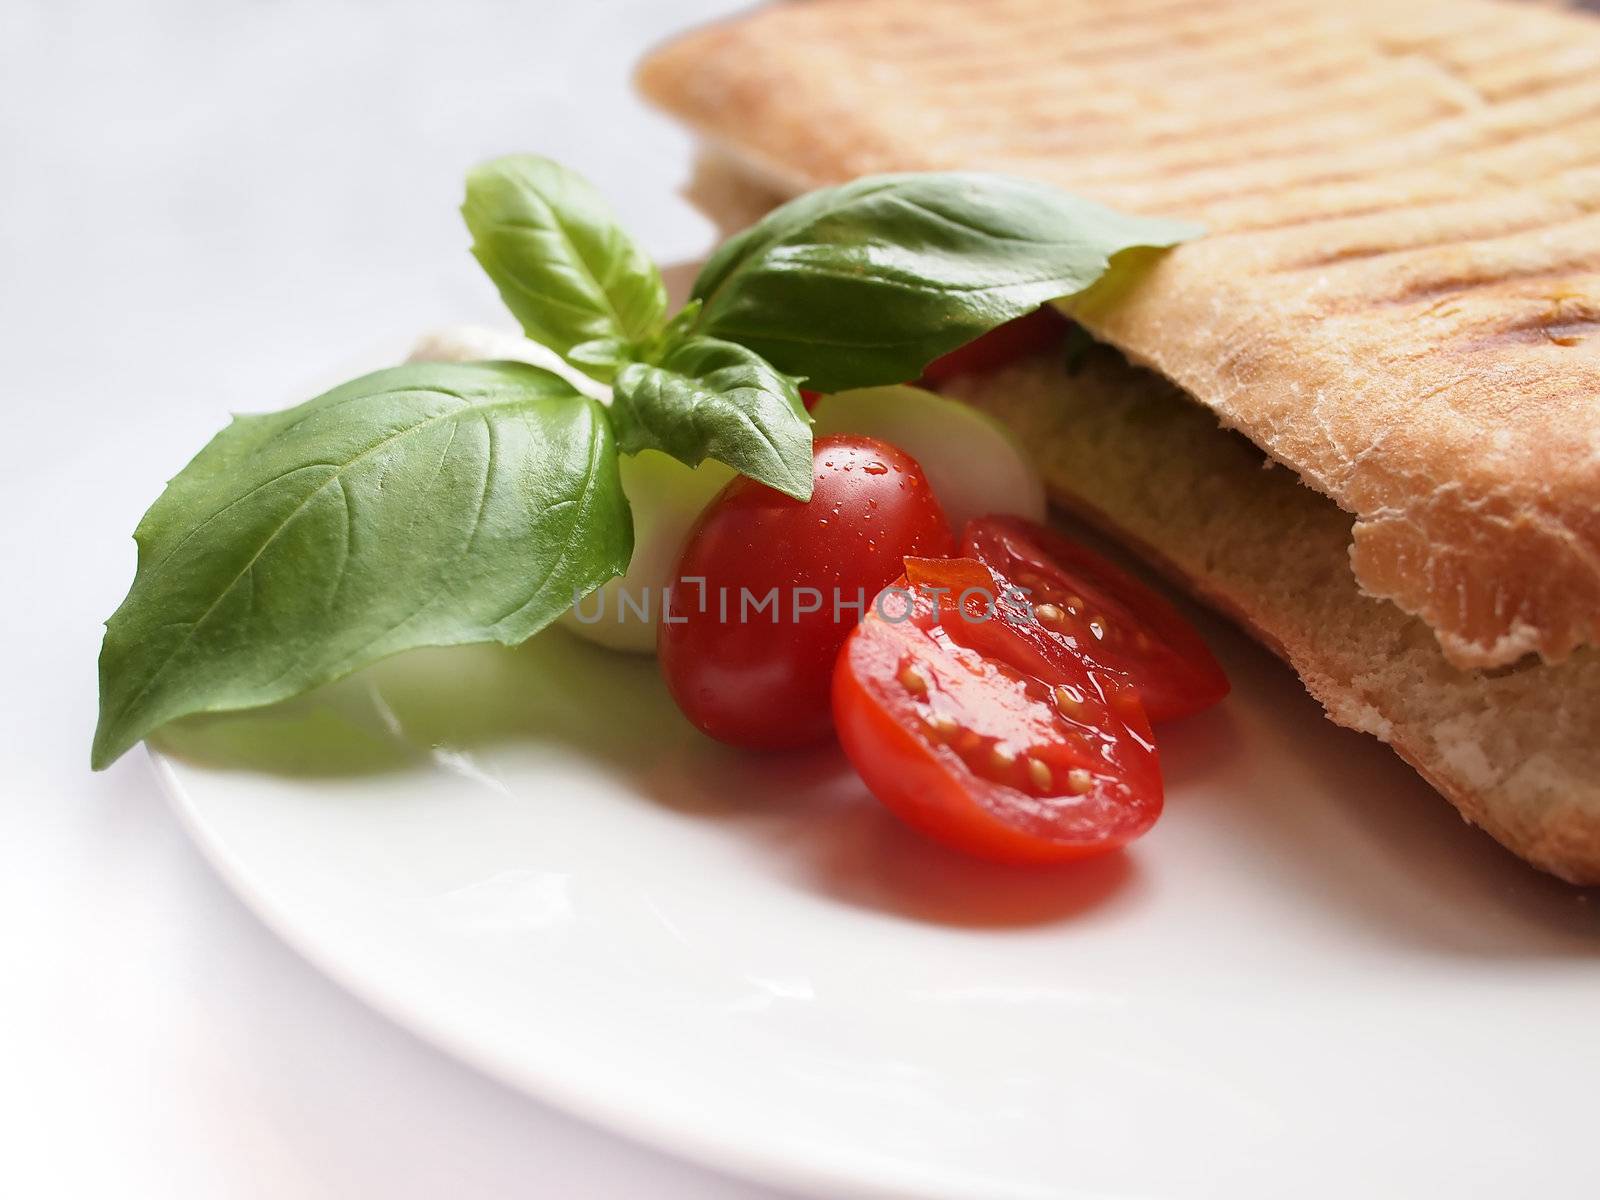 Grilled panini sandwich with tomatoes, mozzarella cheese and bas by pljvv